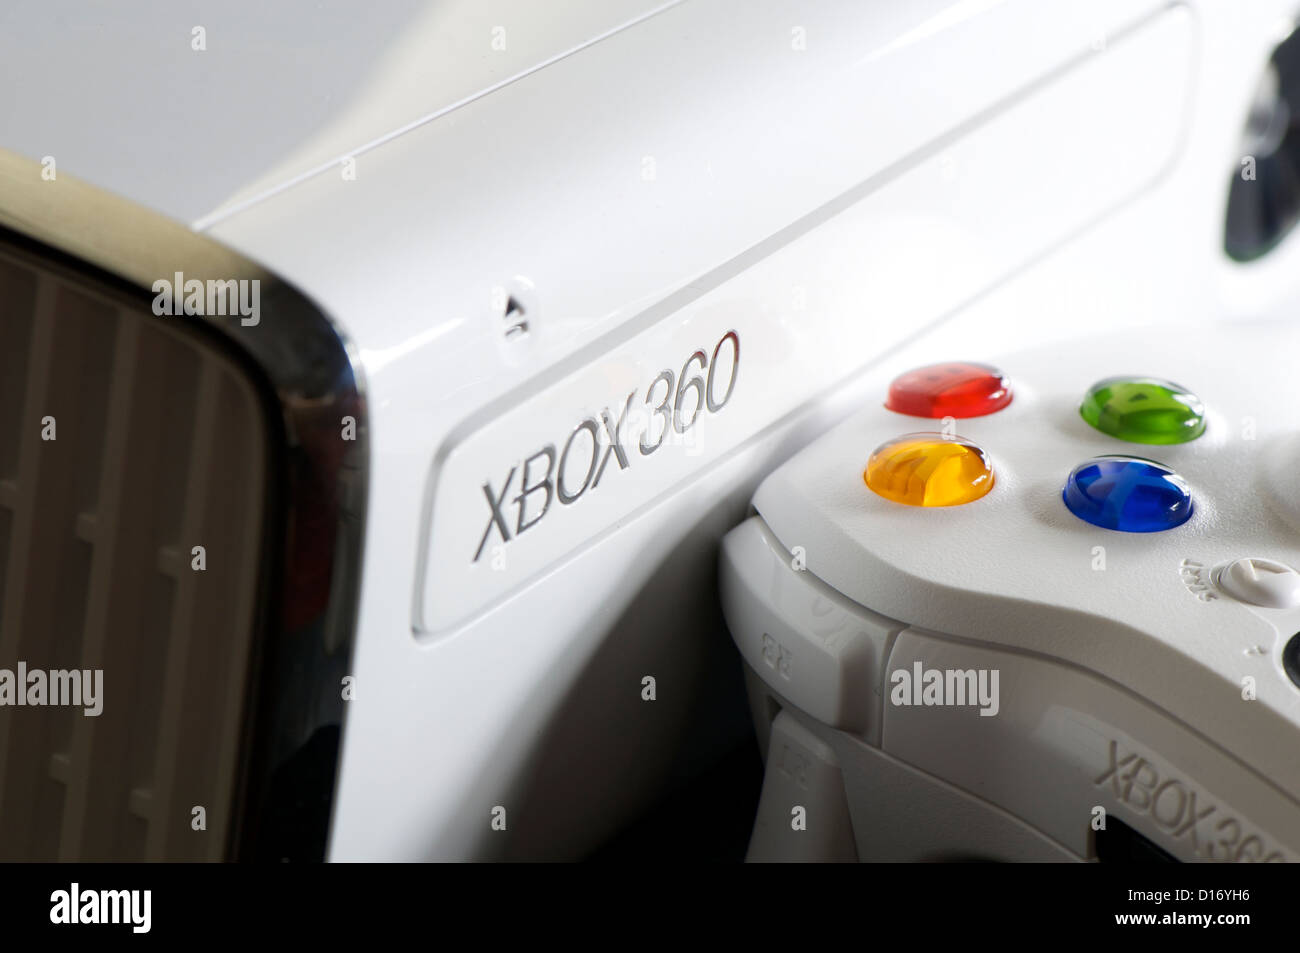 Xbox 360 Console High Resolution Stock Photography and Images - Alamy